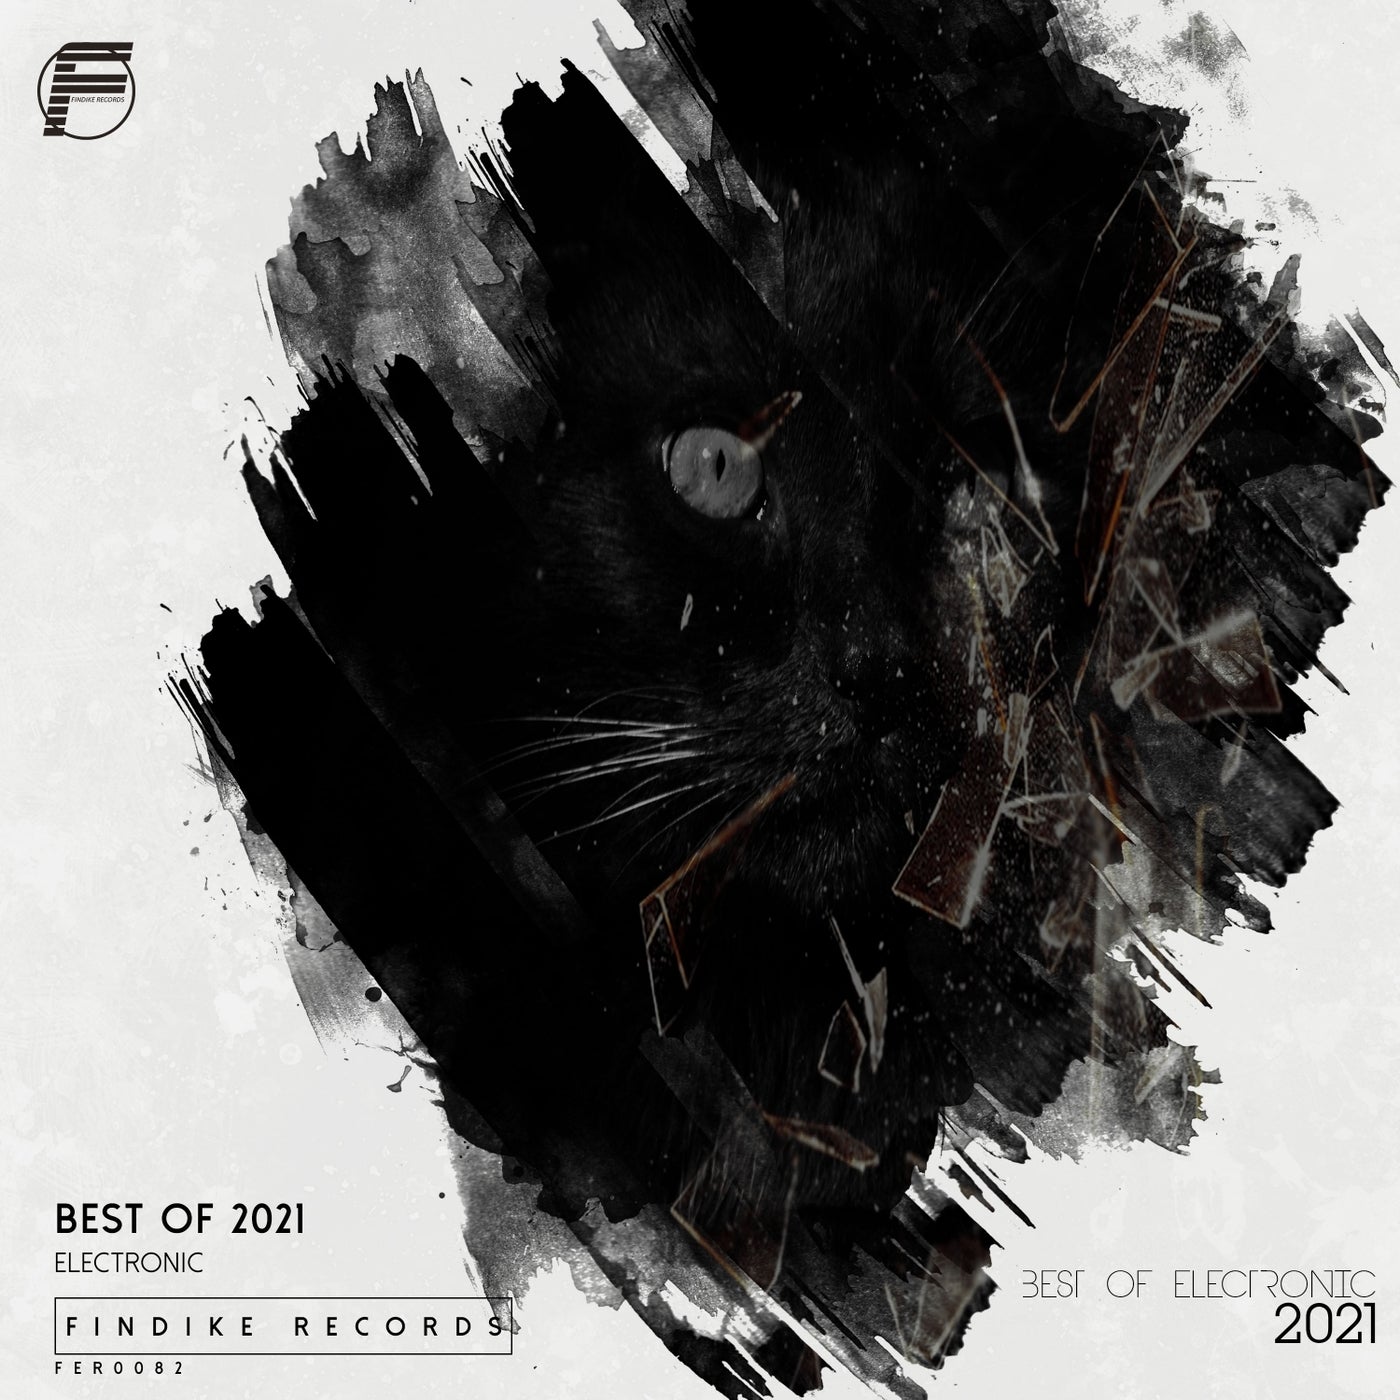 Best of Electronic 2021